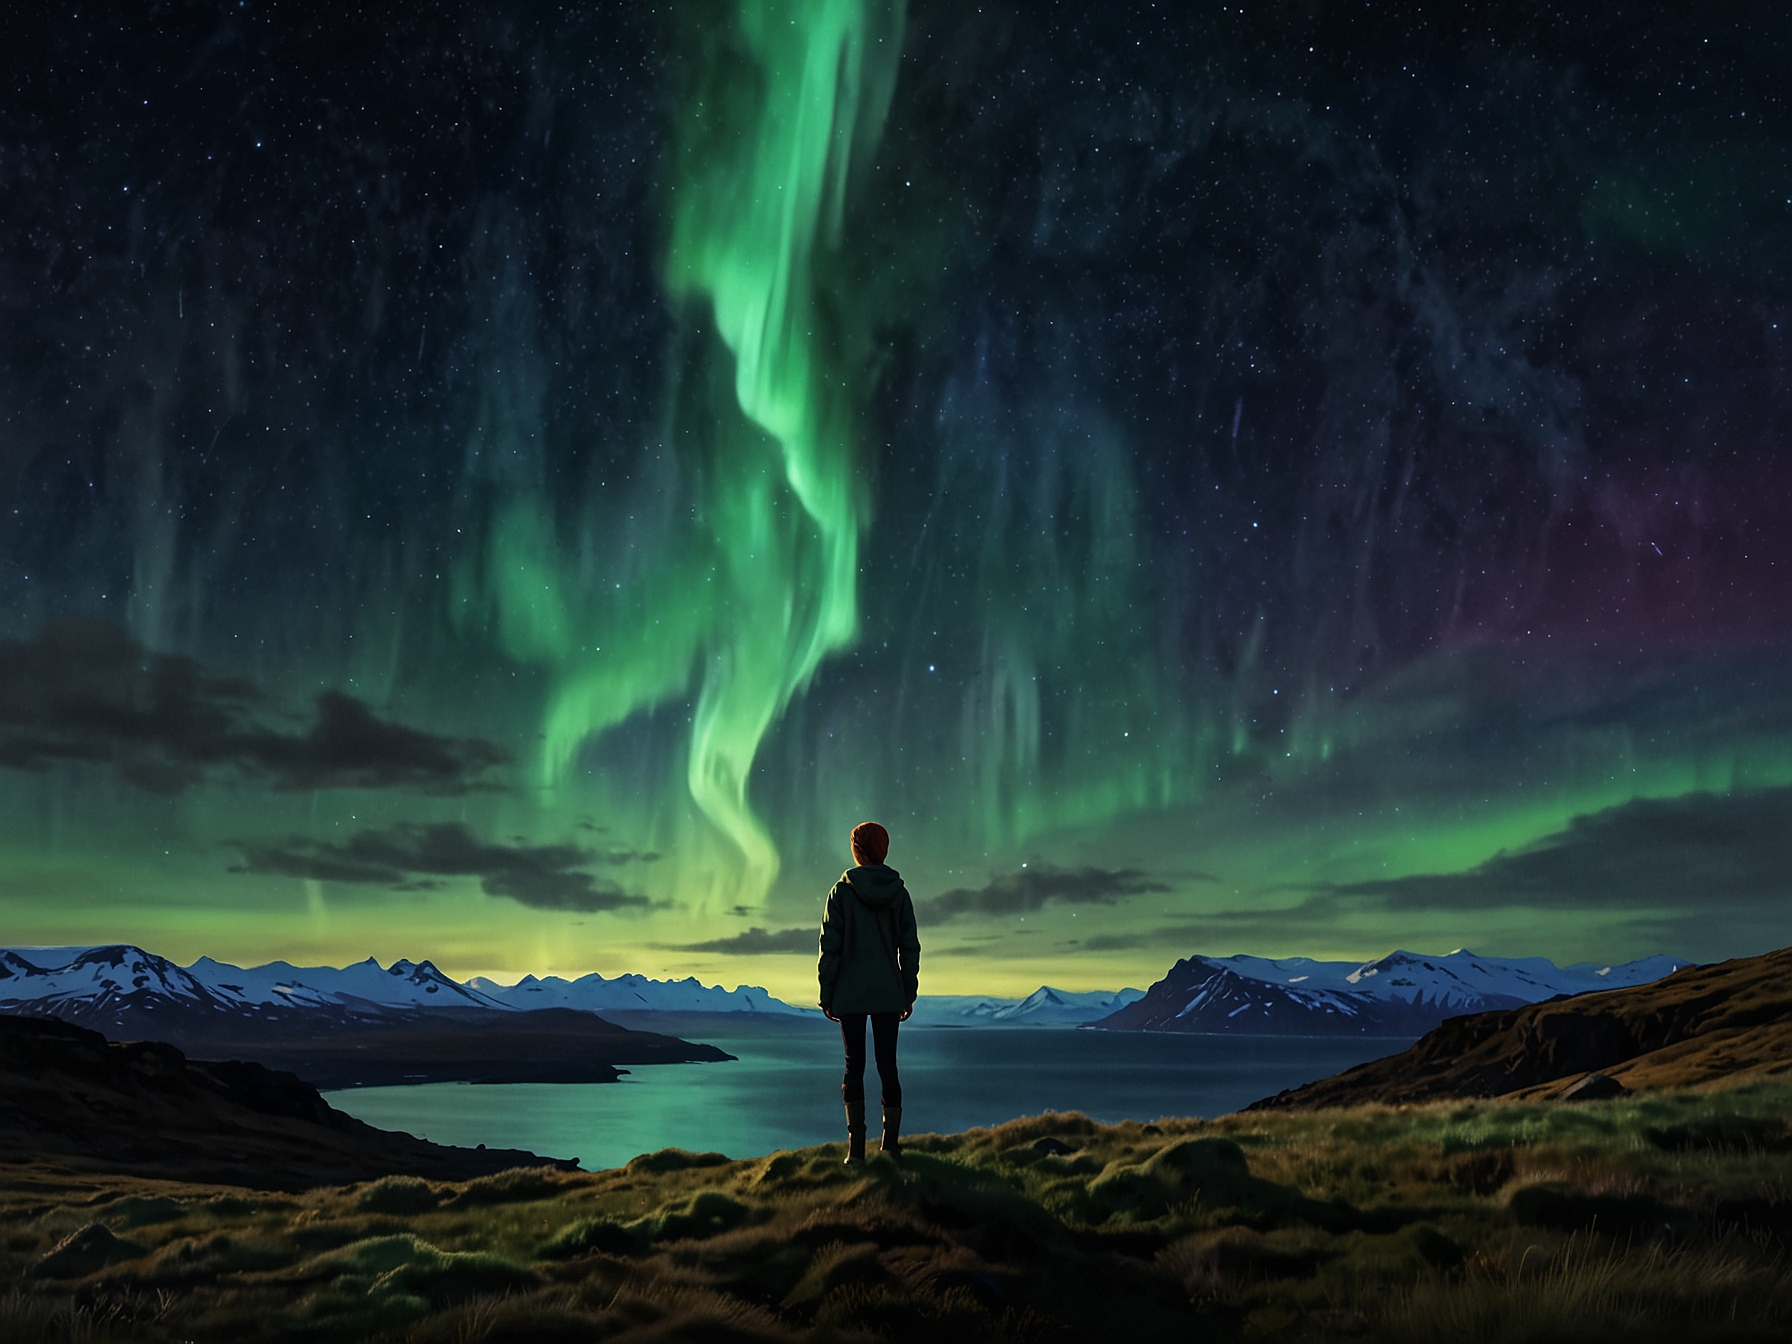 A solo female traveler standing on a cliff in Iceland, gazing at the Northern Lights. The serene and breathtaking natural beauty emphasizes Iceland's safety and allure for solo women travelers.